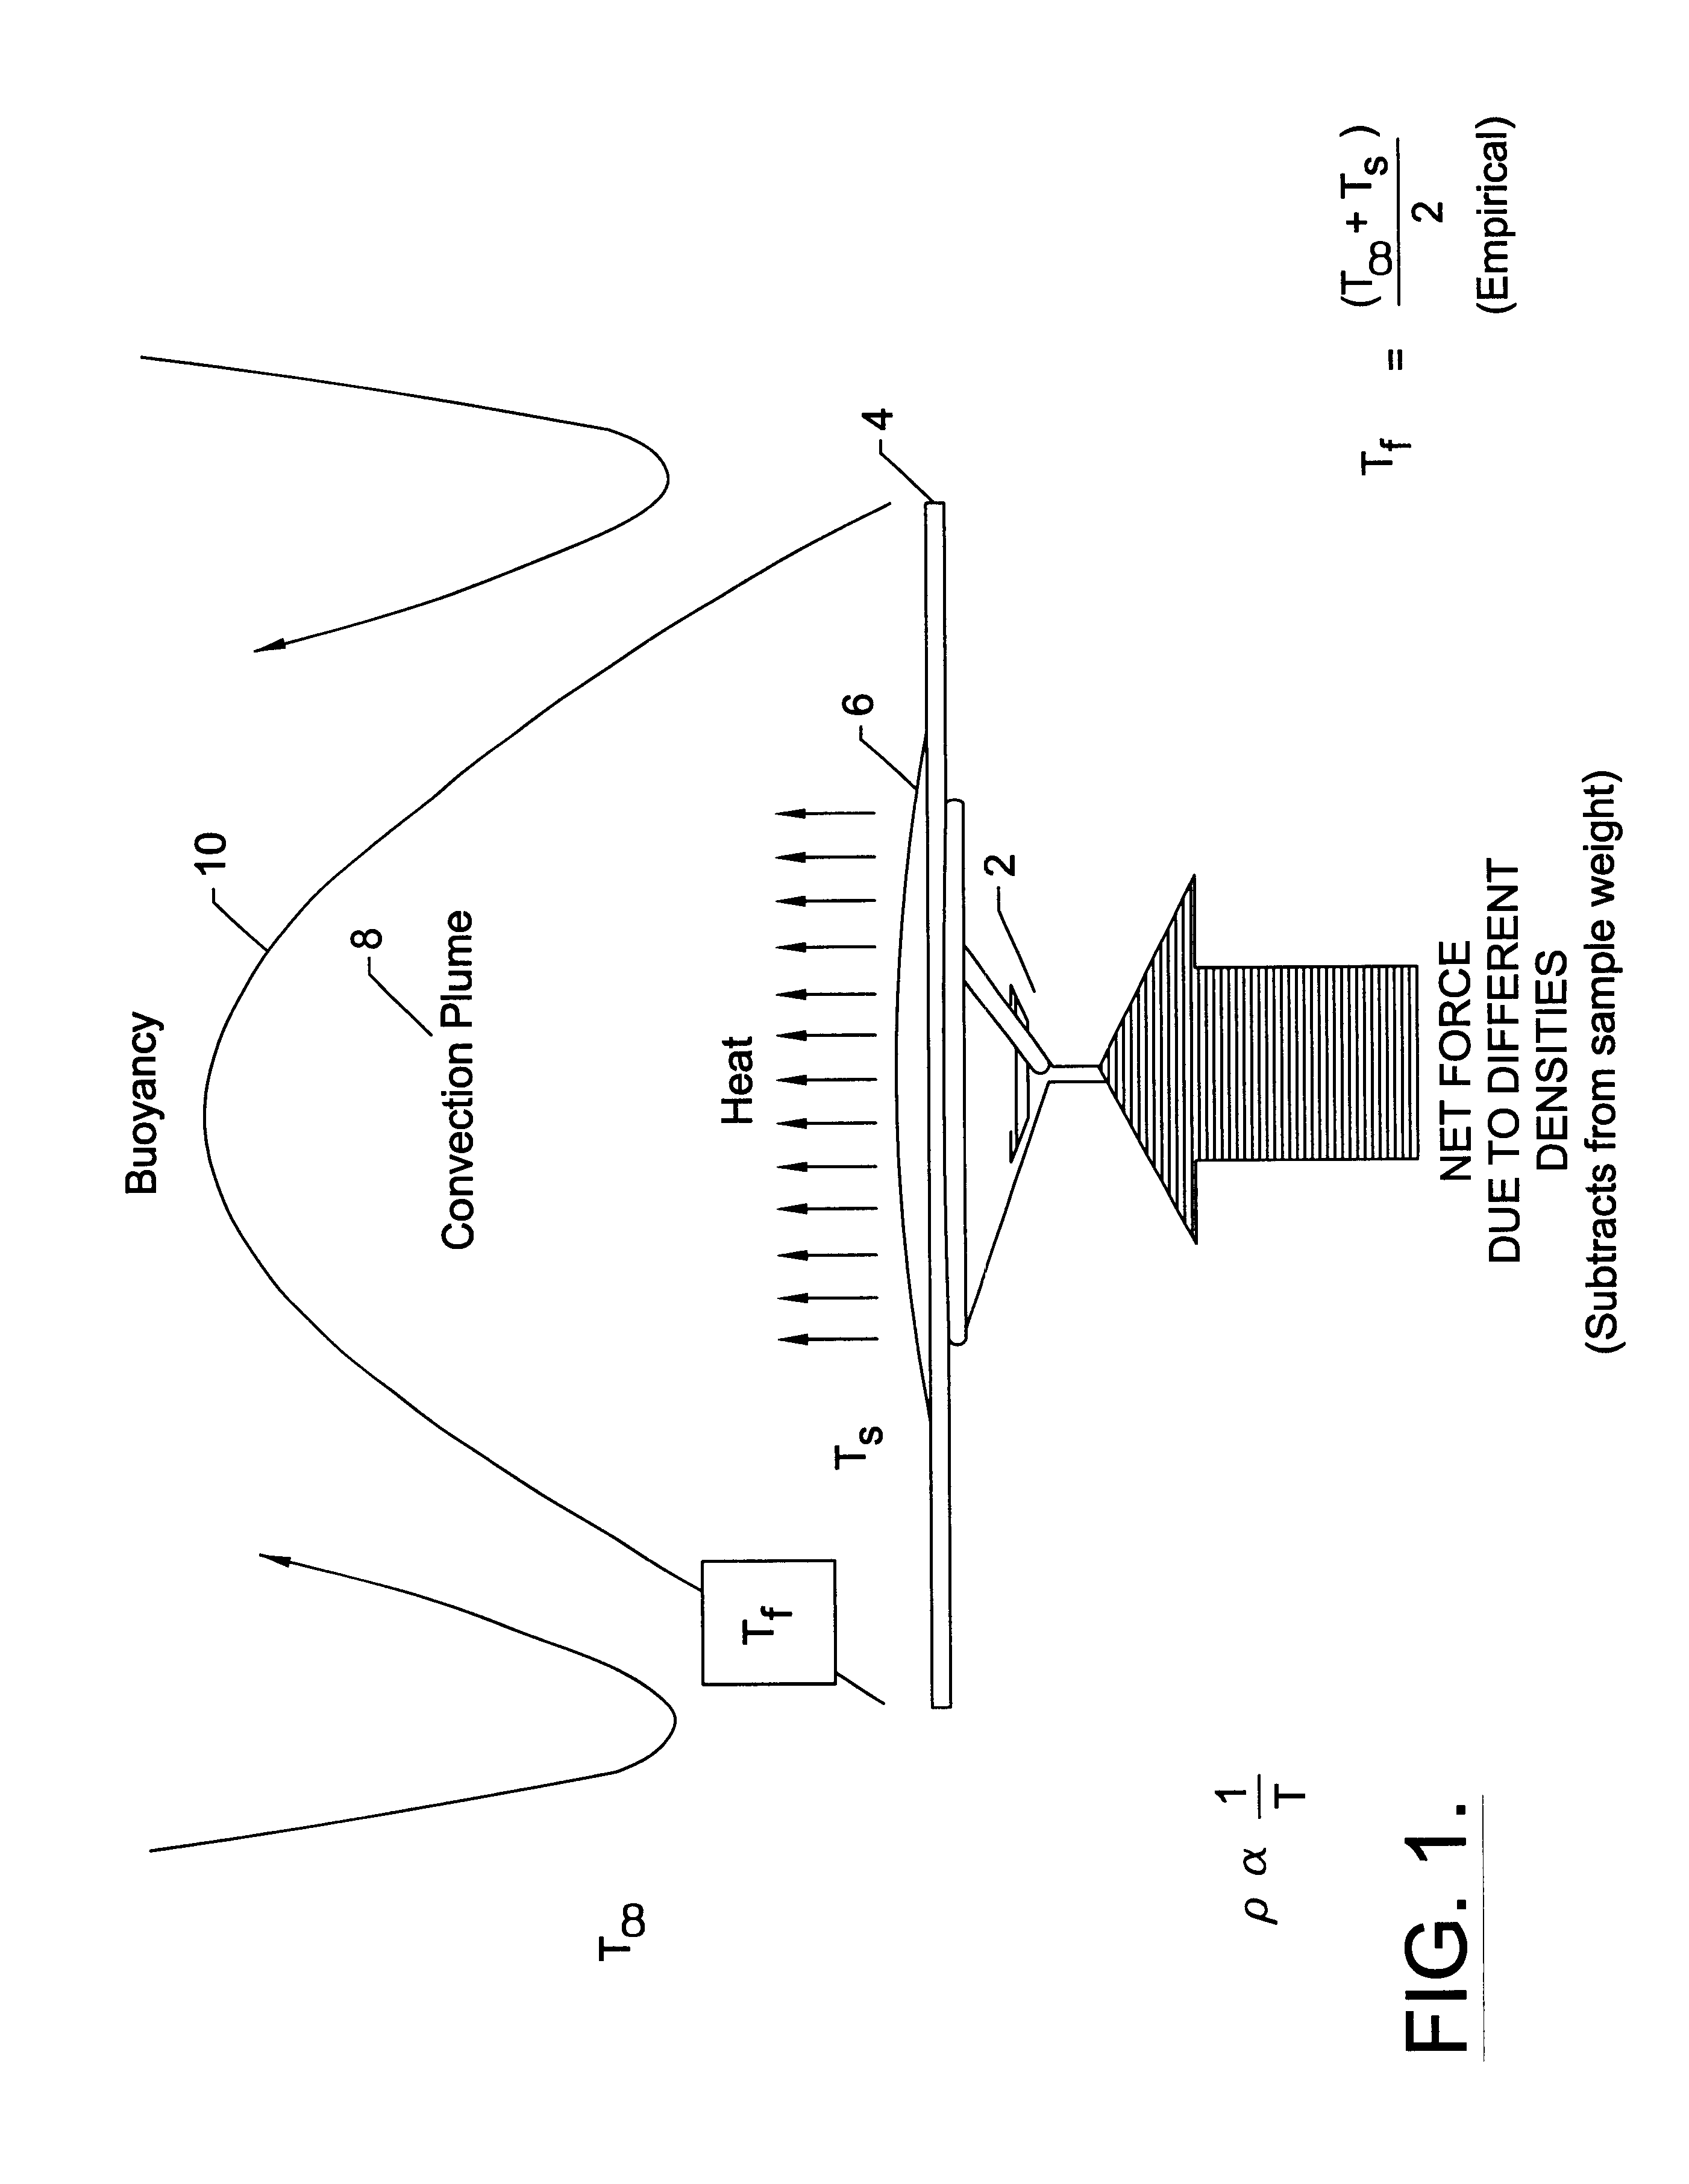 Method for correcting weight measurement errors during microwave heating